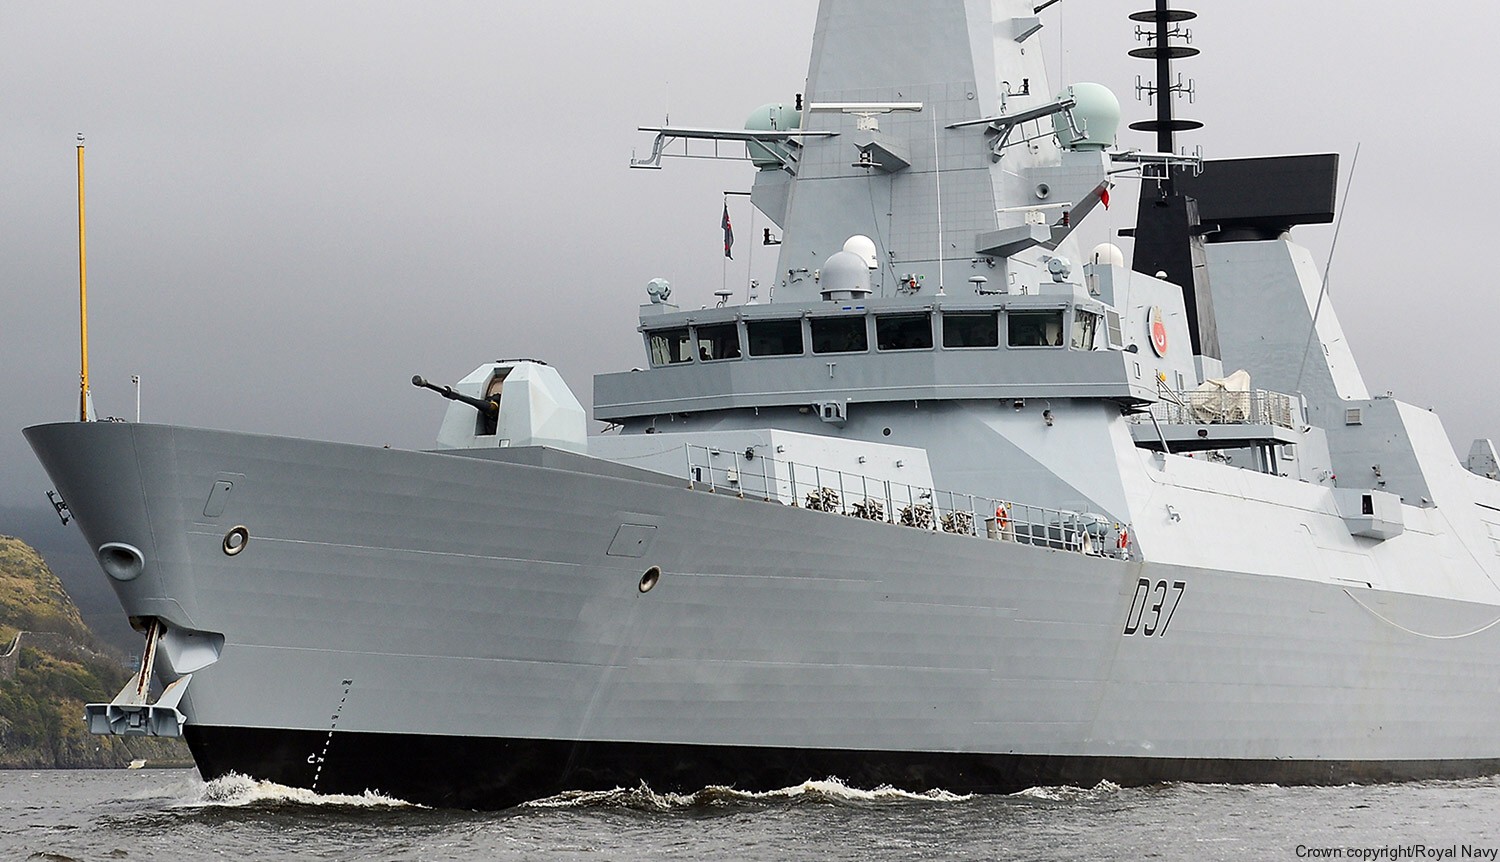 d37 hms duncan d-37 type 45 daring class guided missile destroyer ddg royal navy sea viper 19